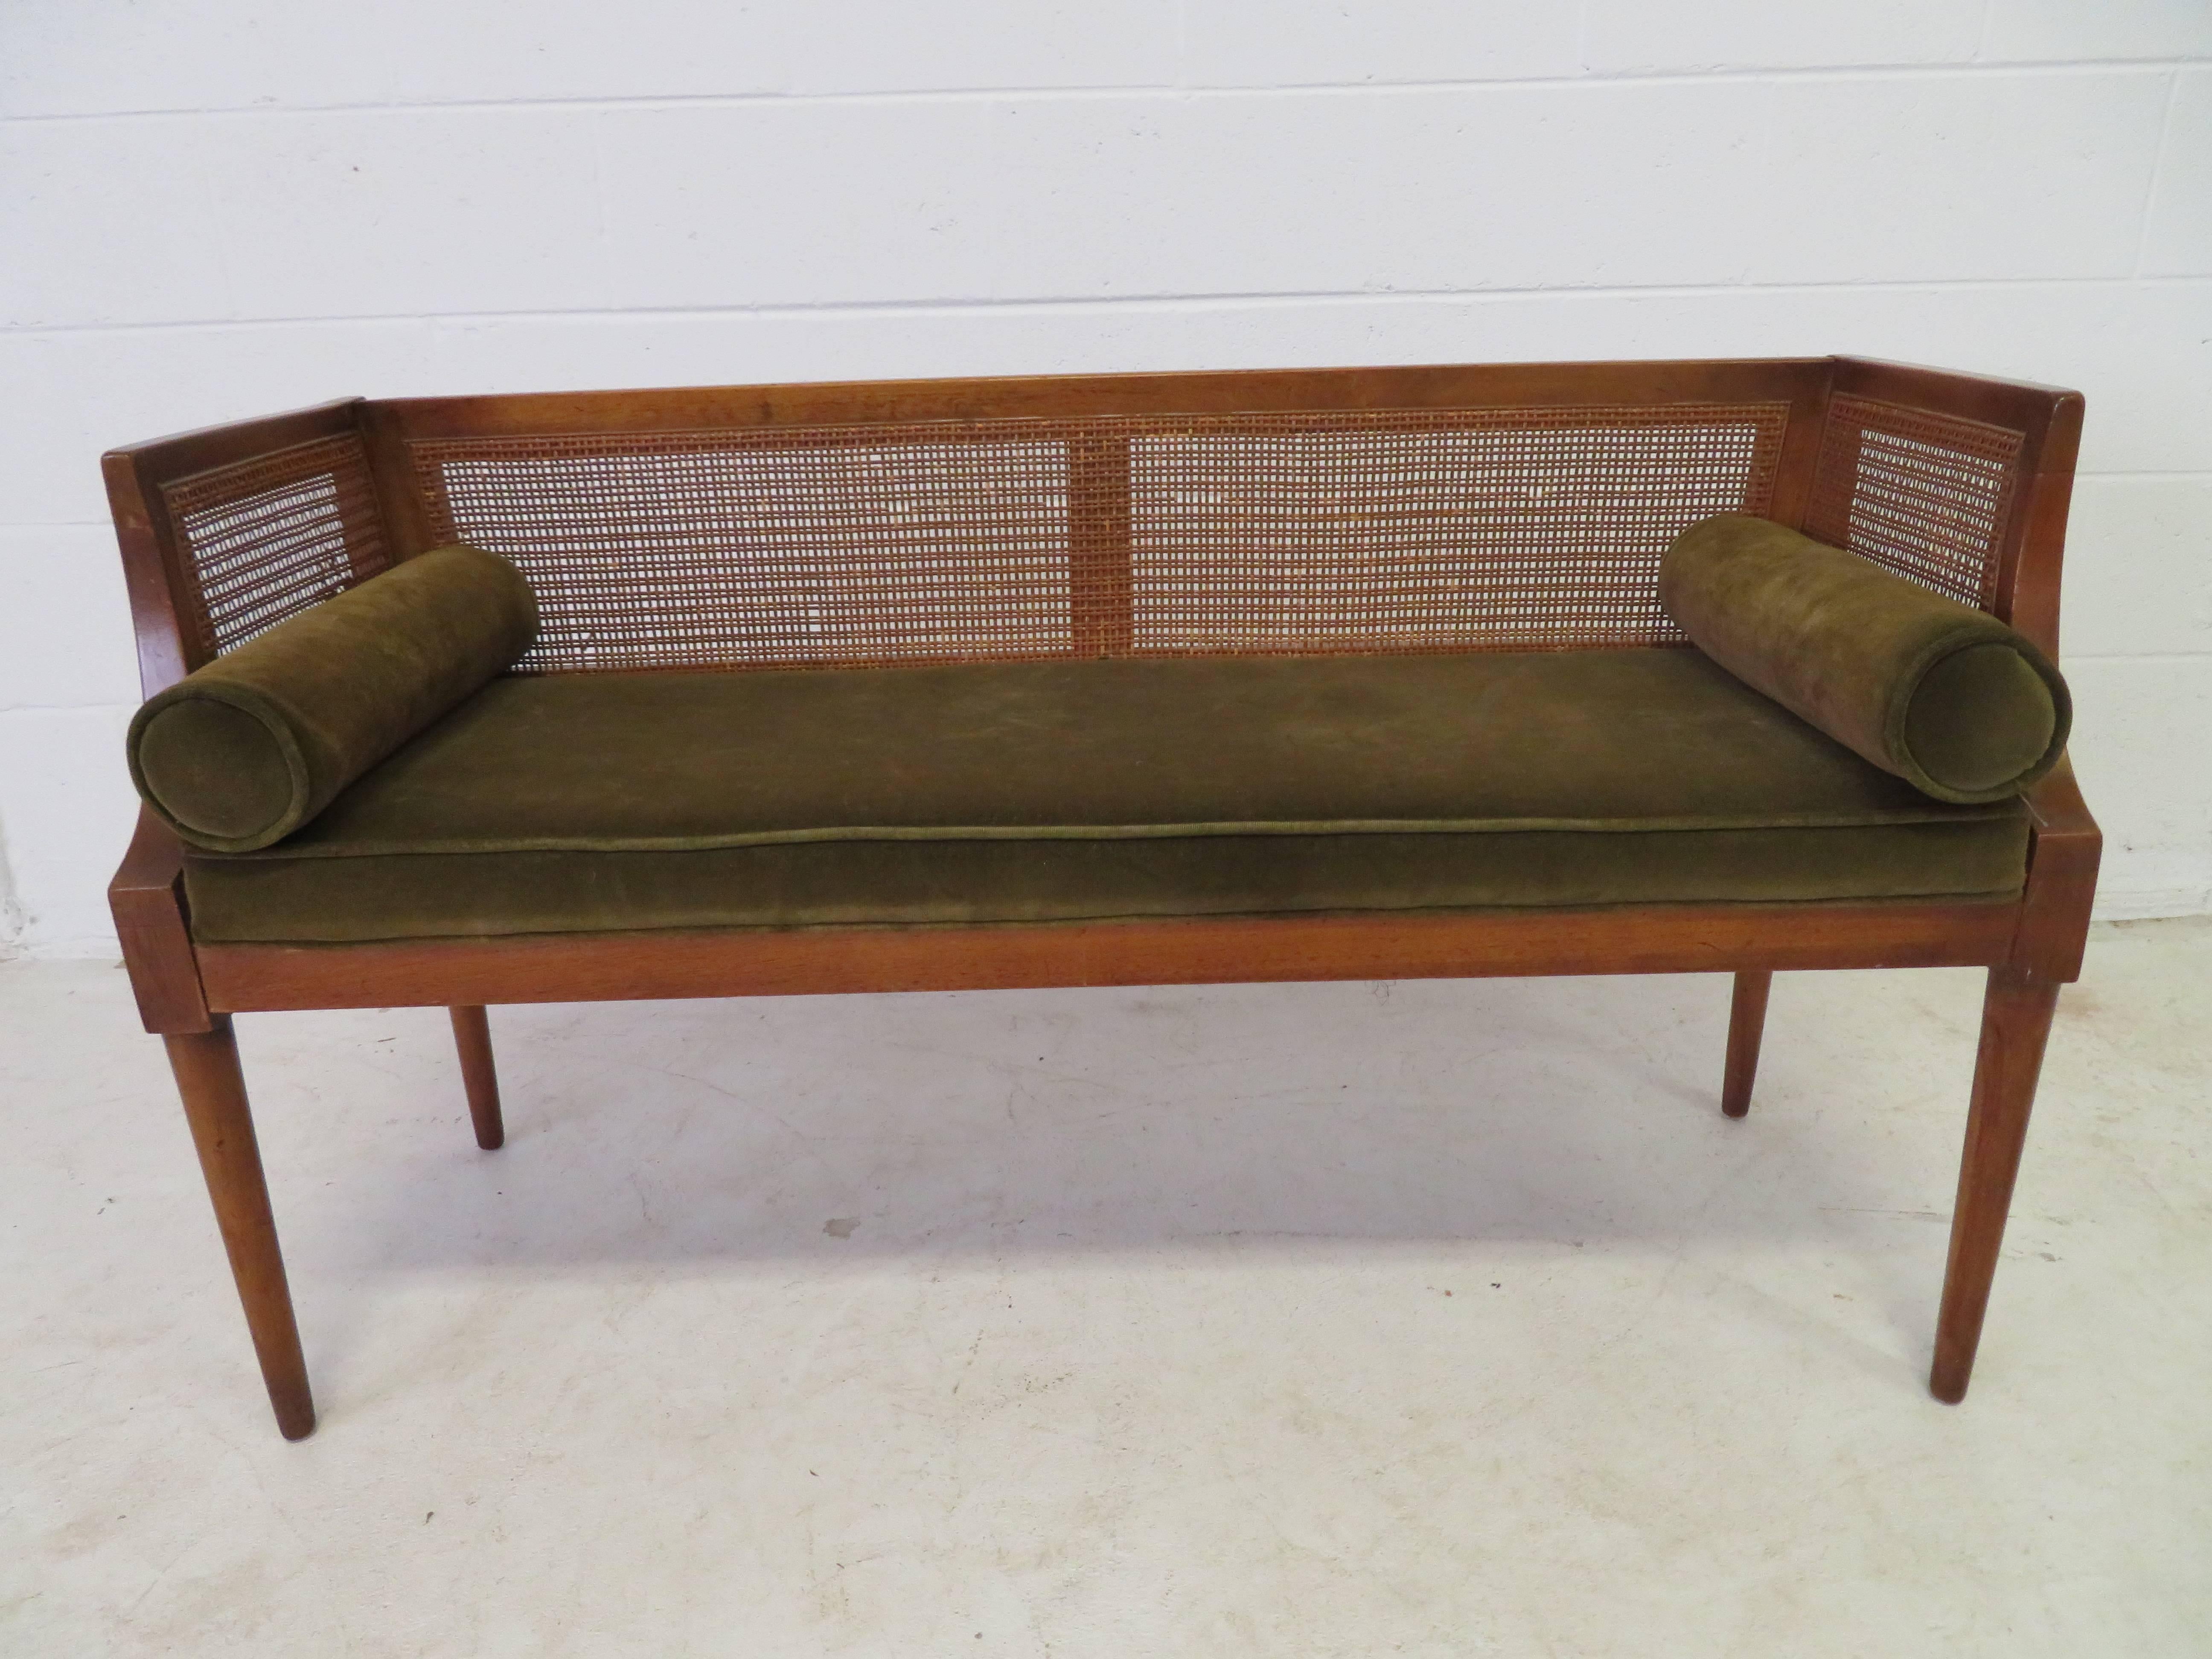 Handsome Danish modern caned window bench with two cylinder pillows. This piece will need to be re-upholstered but that's what you designers are looking for any way-right?